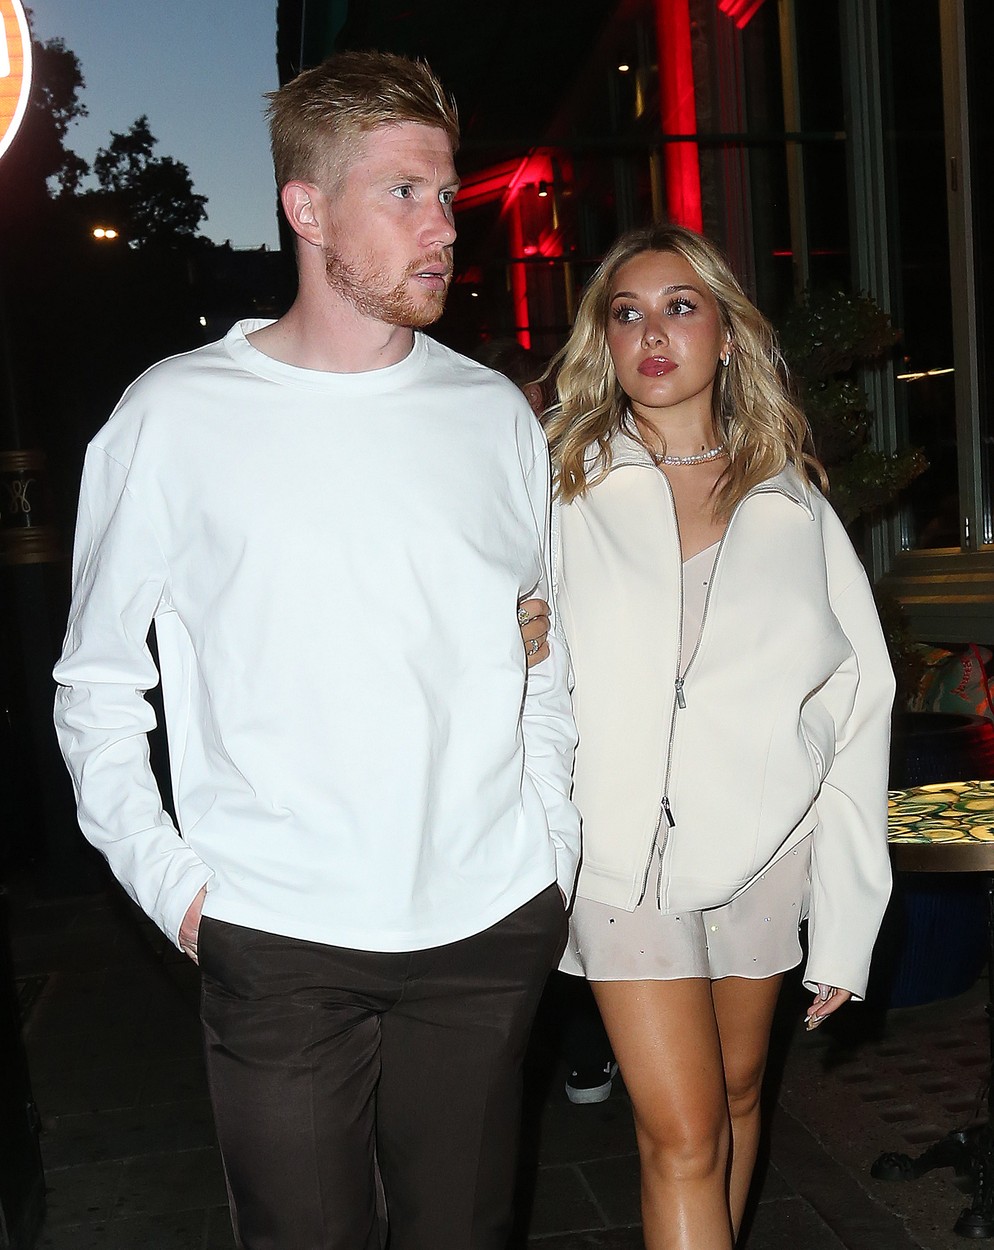 EXCLUSIVE: Belgium & Manchester City star footballer Kevin De Bruyne seen here with his wife Michele Lacroix on a romantic night out at Mayfair restaurant Sexy Fish In London.
31 Jul 2022,Image: 711106777, License: Rights-managed, Restrictions: World Rights, Model Release: no, Pictured: Kevin De Bruyne,  Michele Lacroix